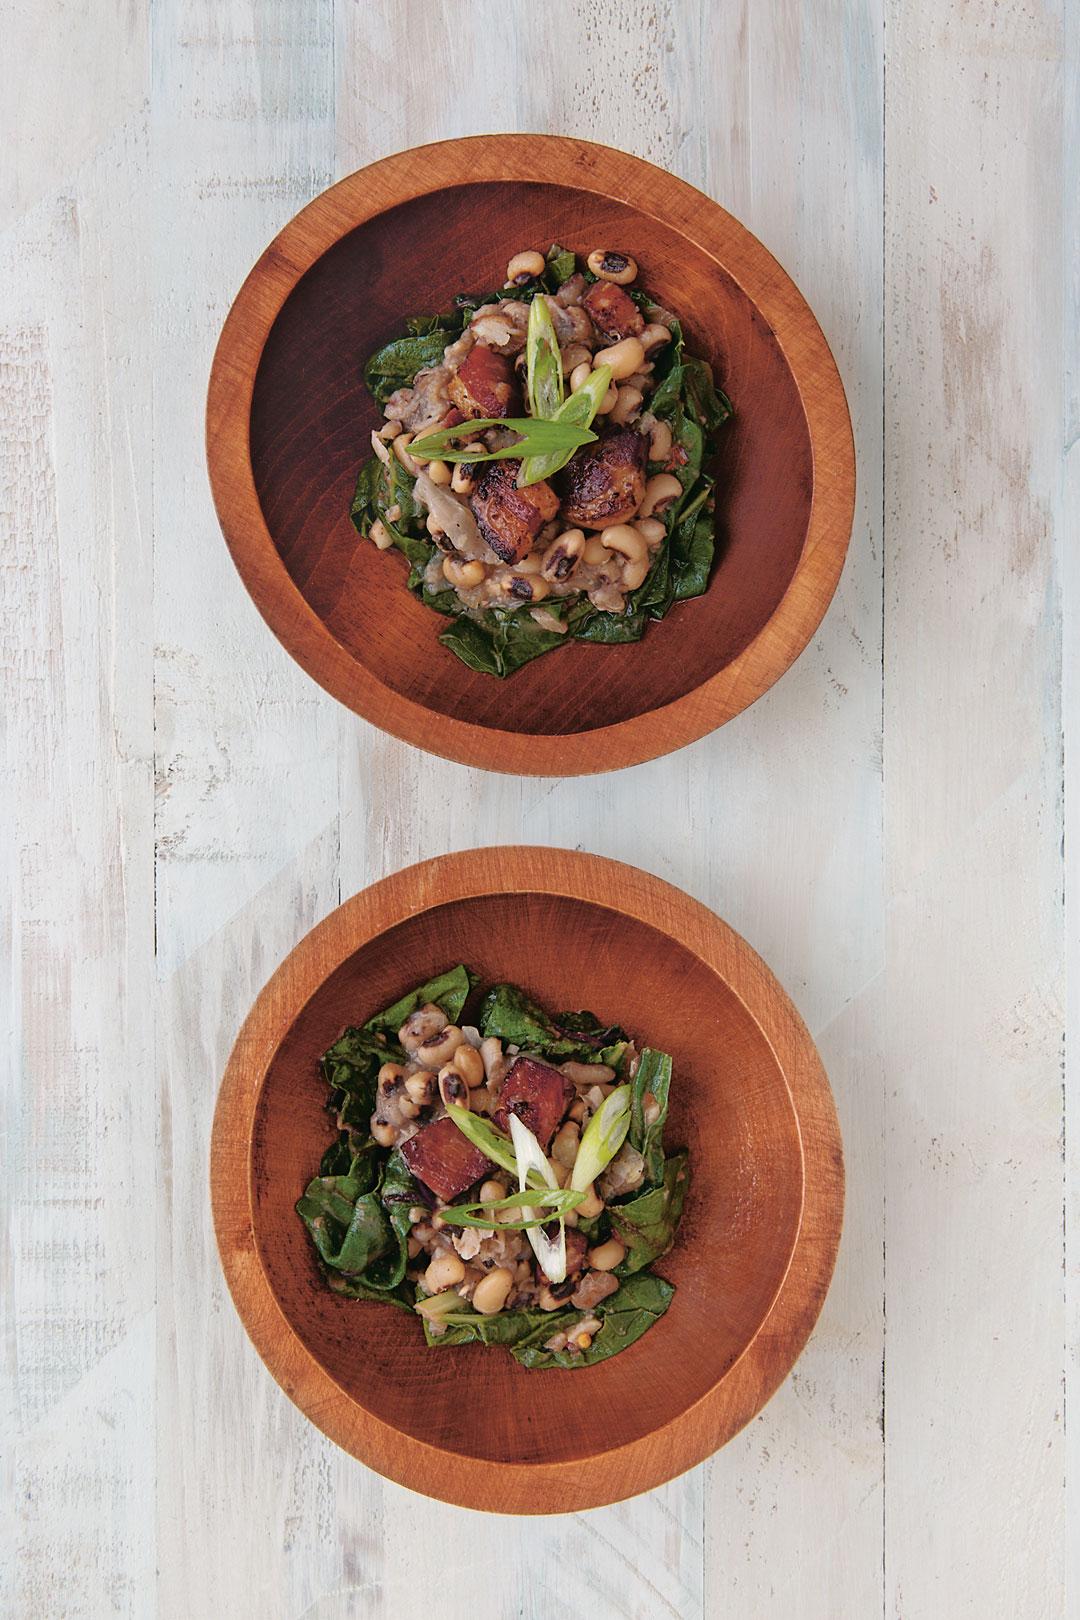 Black-eyed peas with salt pork and greens, as featured in America the Cookbook